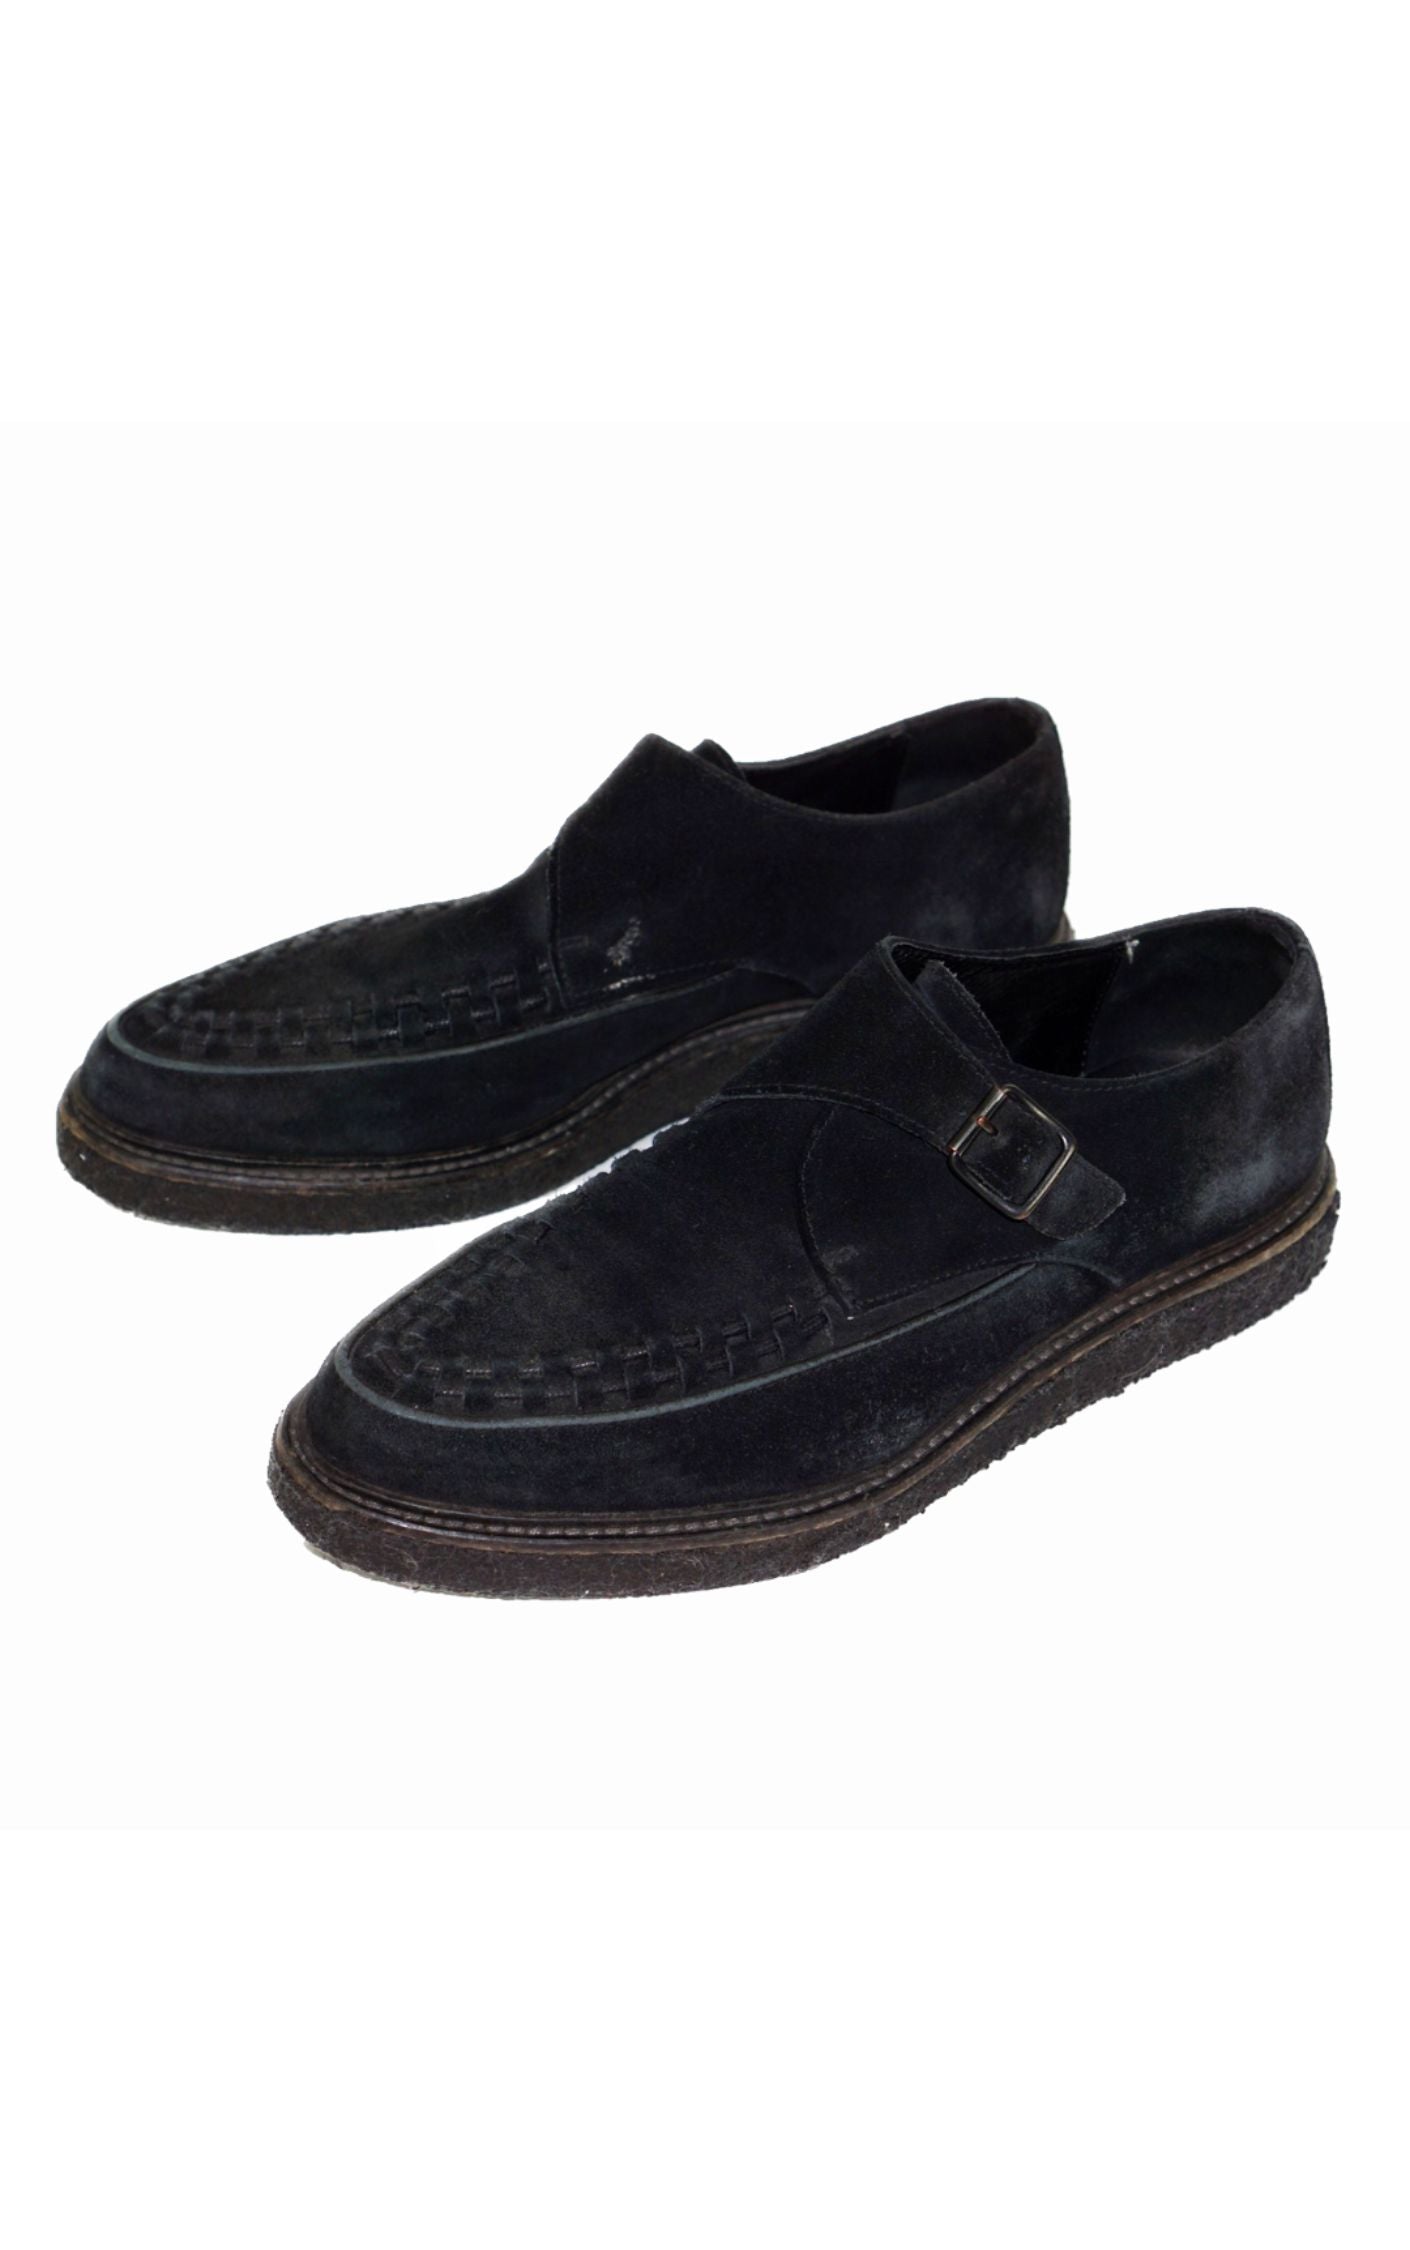 ALLSAINTS Rollin Suede Creepers Loafers resellum